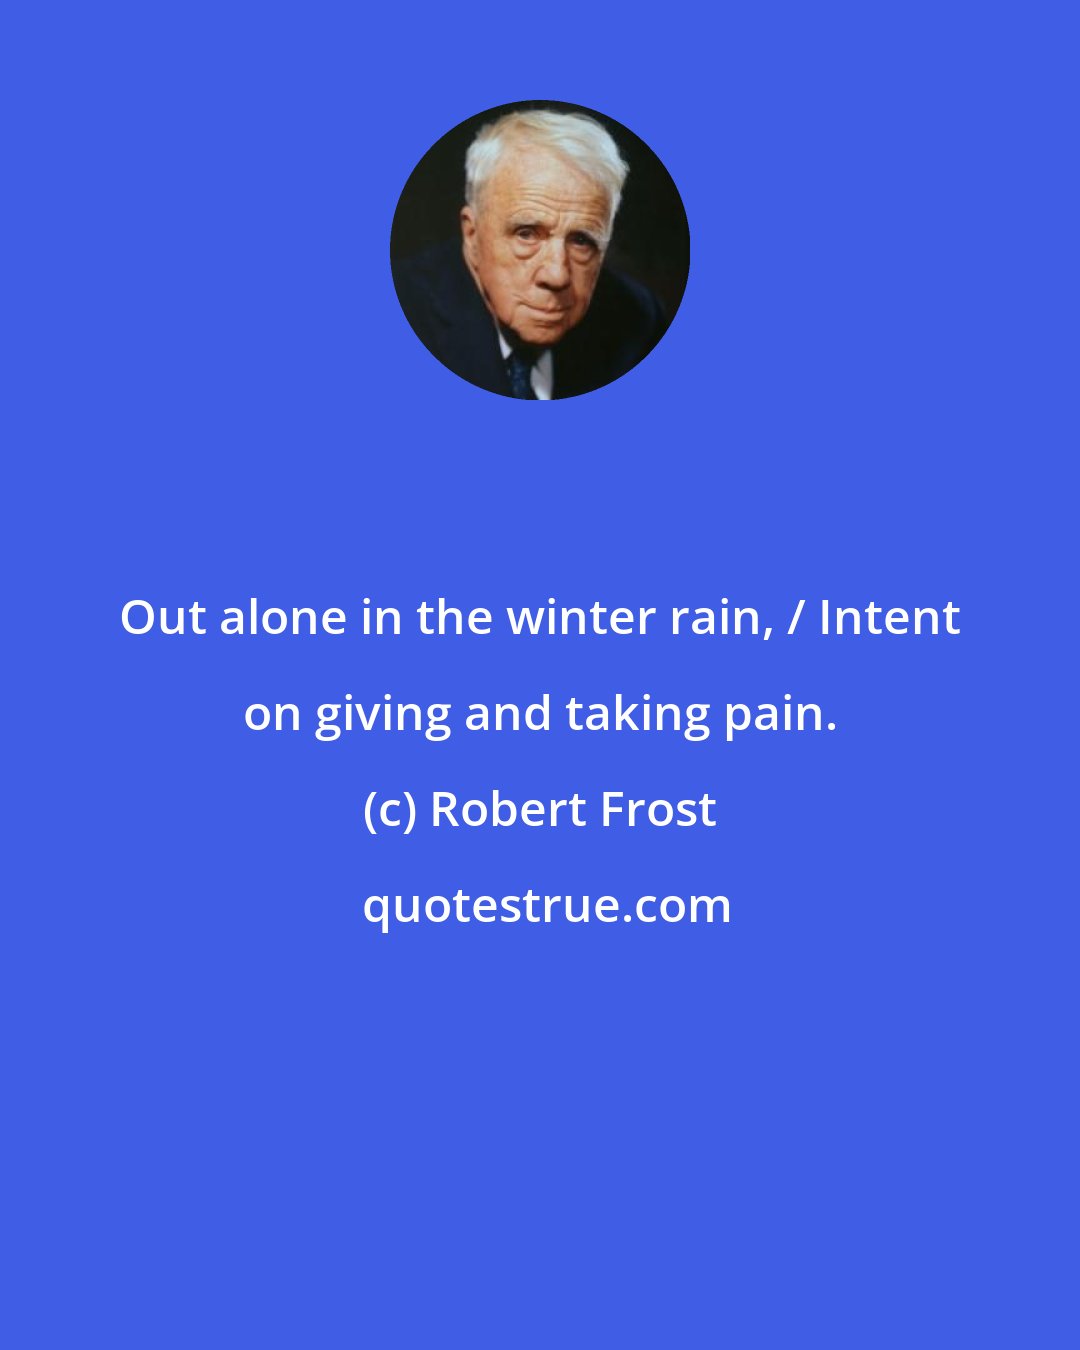 Robert Frost: Out alone in the winter rain, / Intent on giving and taking pain.